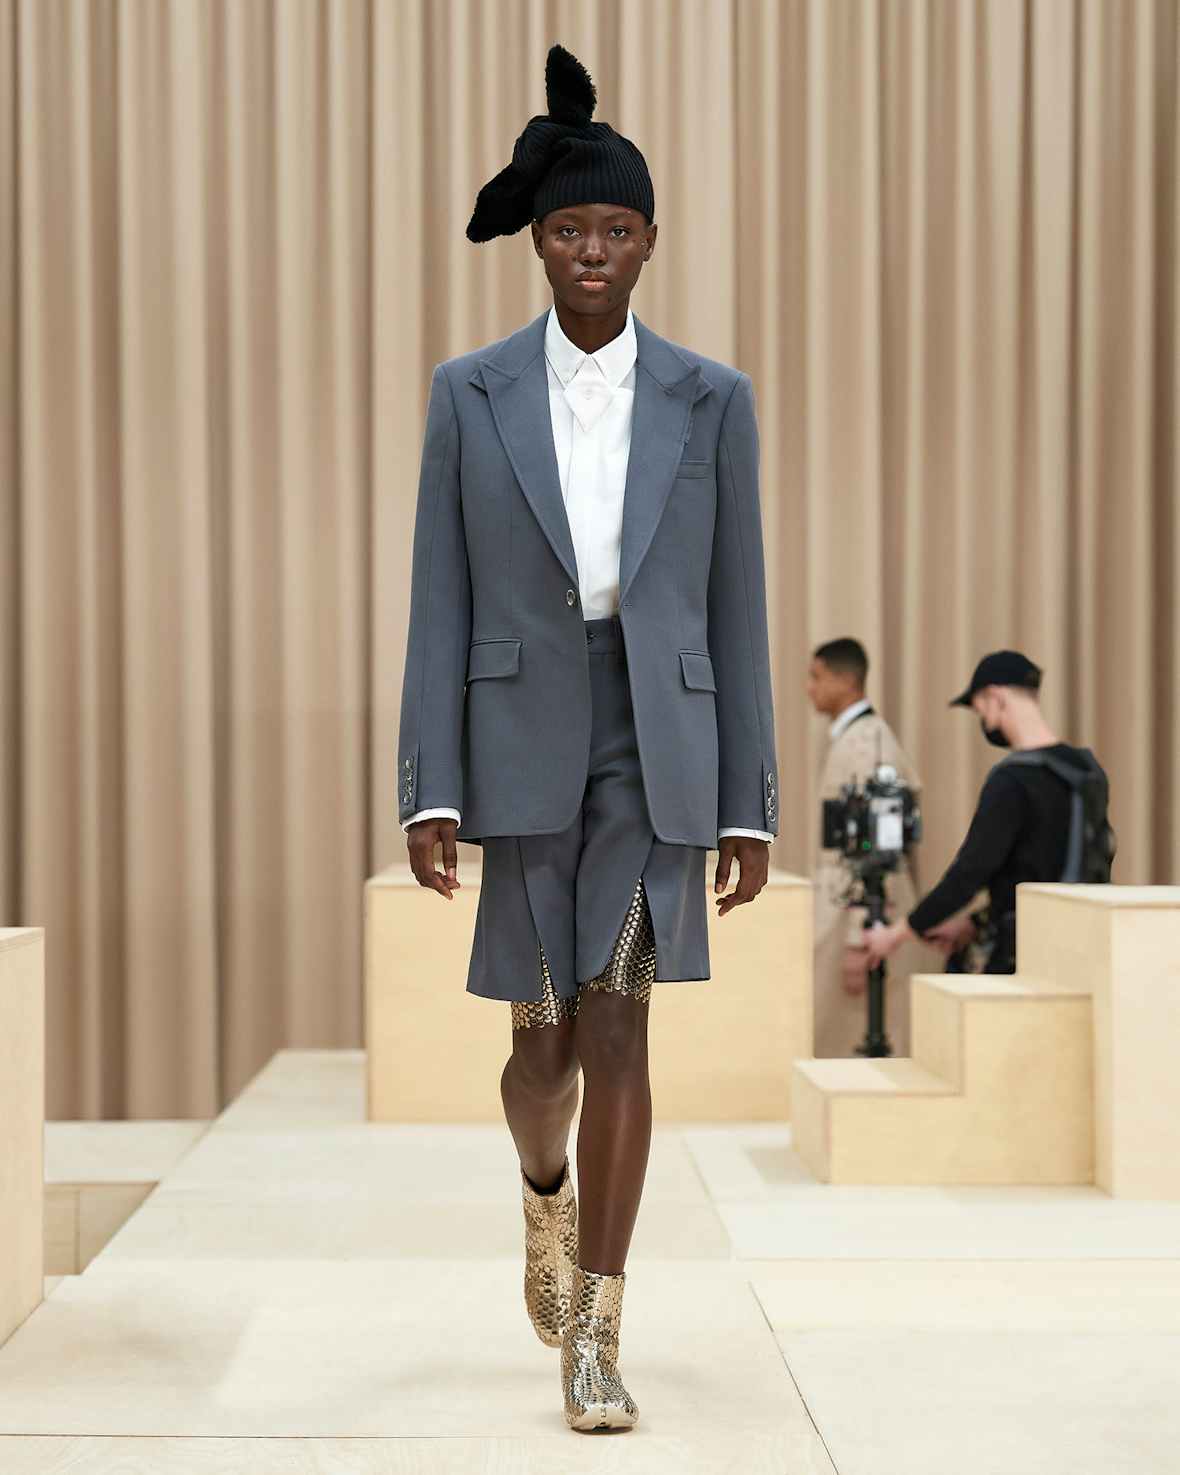 Louis Vuitton on X: No need to compromise style for function. The